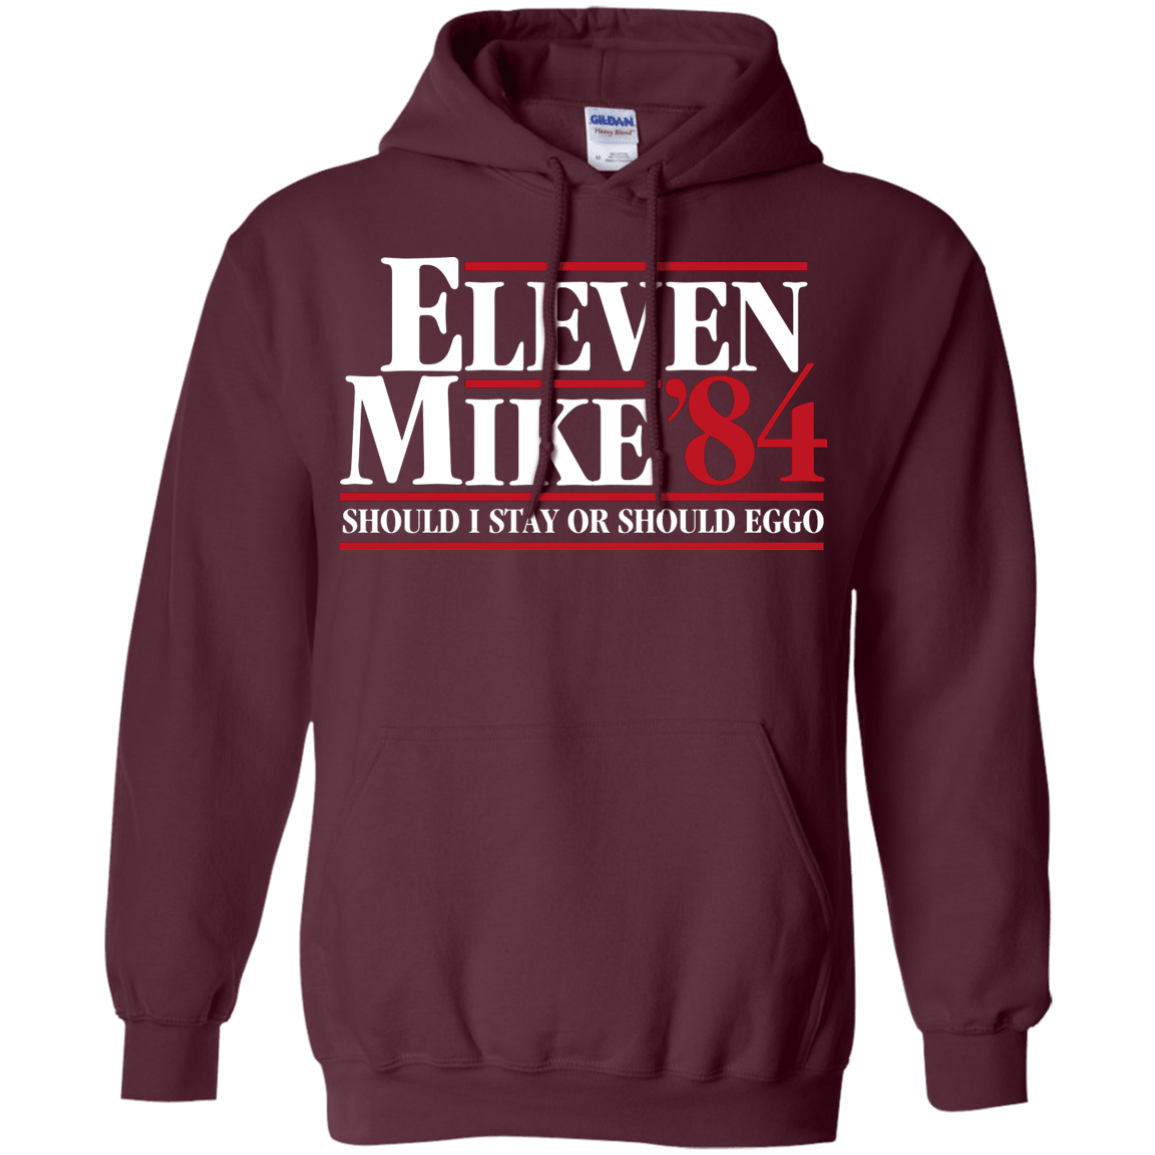 Sweatshirts Maroon / Small Eleven Mike 84 - Should I Stay or Should Eggo Pullover Hoodie